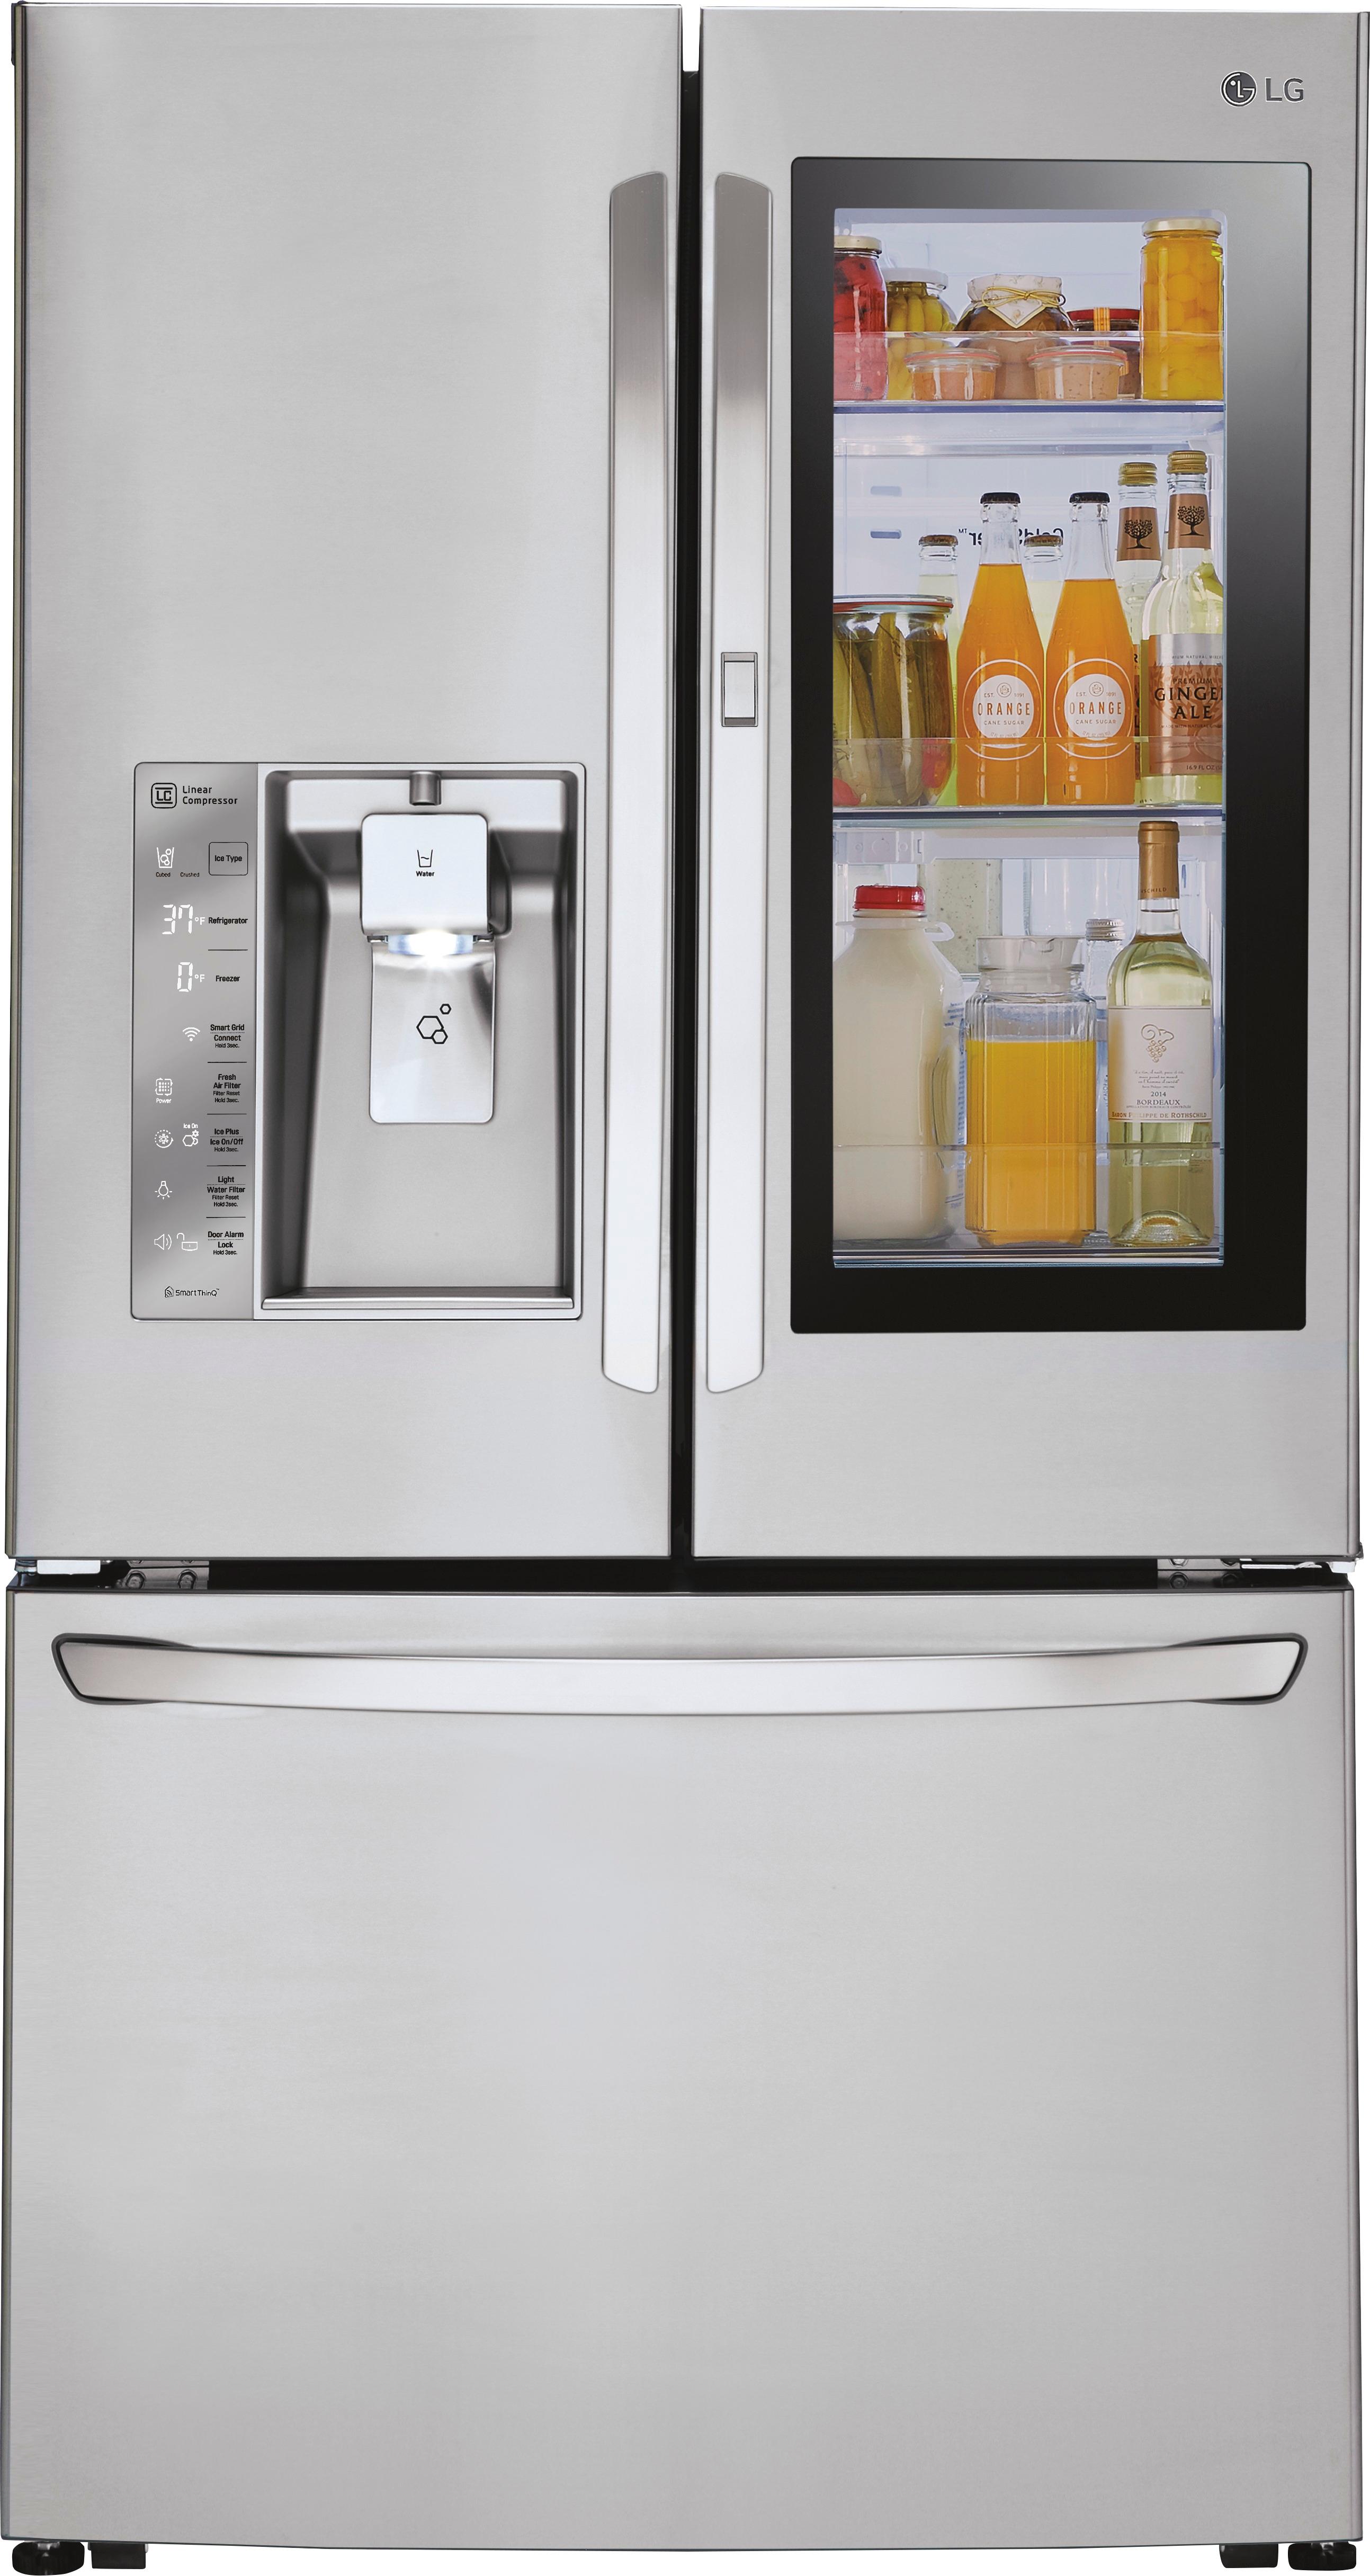 37+ How to connect lg thinq refrigerator to wifi ideas in 2021 